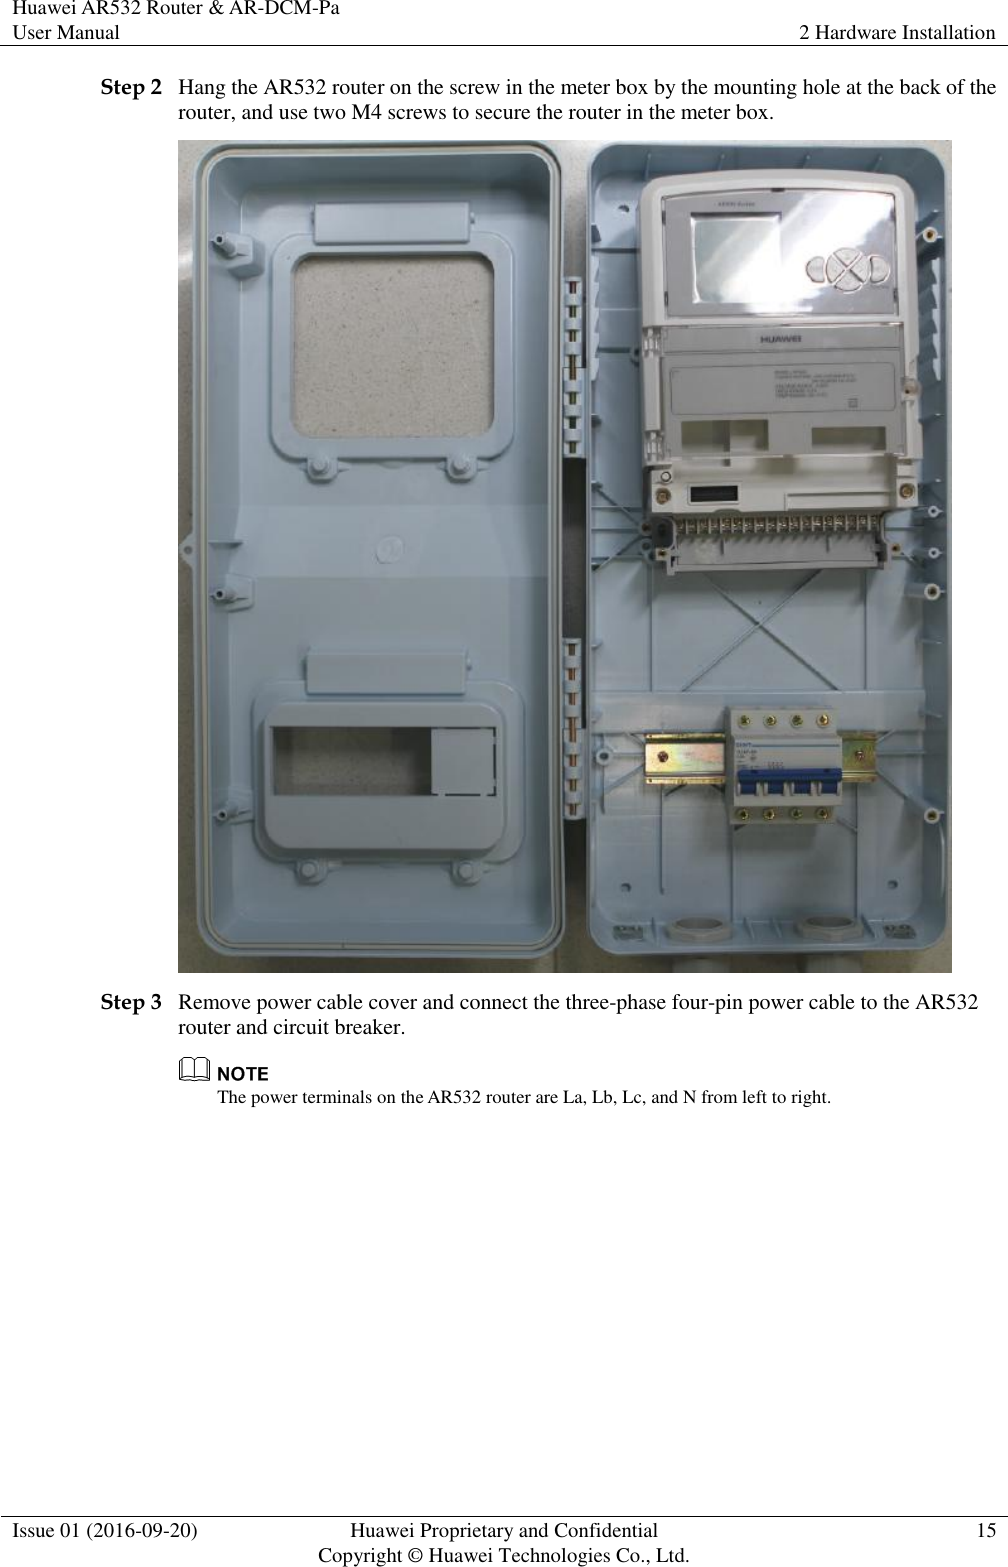 Huawei AR532 Router &amp; AR-DCM-Pa User Manual 2 Hardware Installation  Issue 01 (2016-09-20) Huawei Proprietary and Confidential                                     Copyright © Huawei Technologies Co., Ltd. 15  Step 2 Hang the AR532 router on the screw in the meter box by the mounting hole at the back of the router, and use two M4 screws to secure the router in the meter box.  Step 3 Remove power cable cover and connect the three-phase four-pin power cable to the AR532 router and circuit breaker.  The power terminals on the AR532 router are La, Lb, Lc, and N from left to right. 